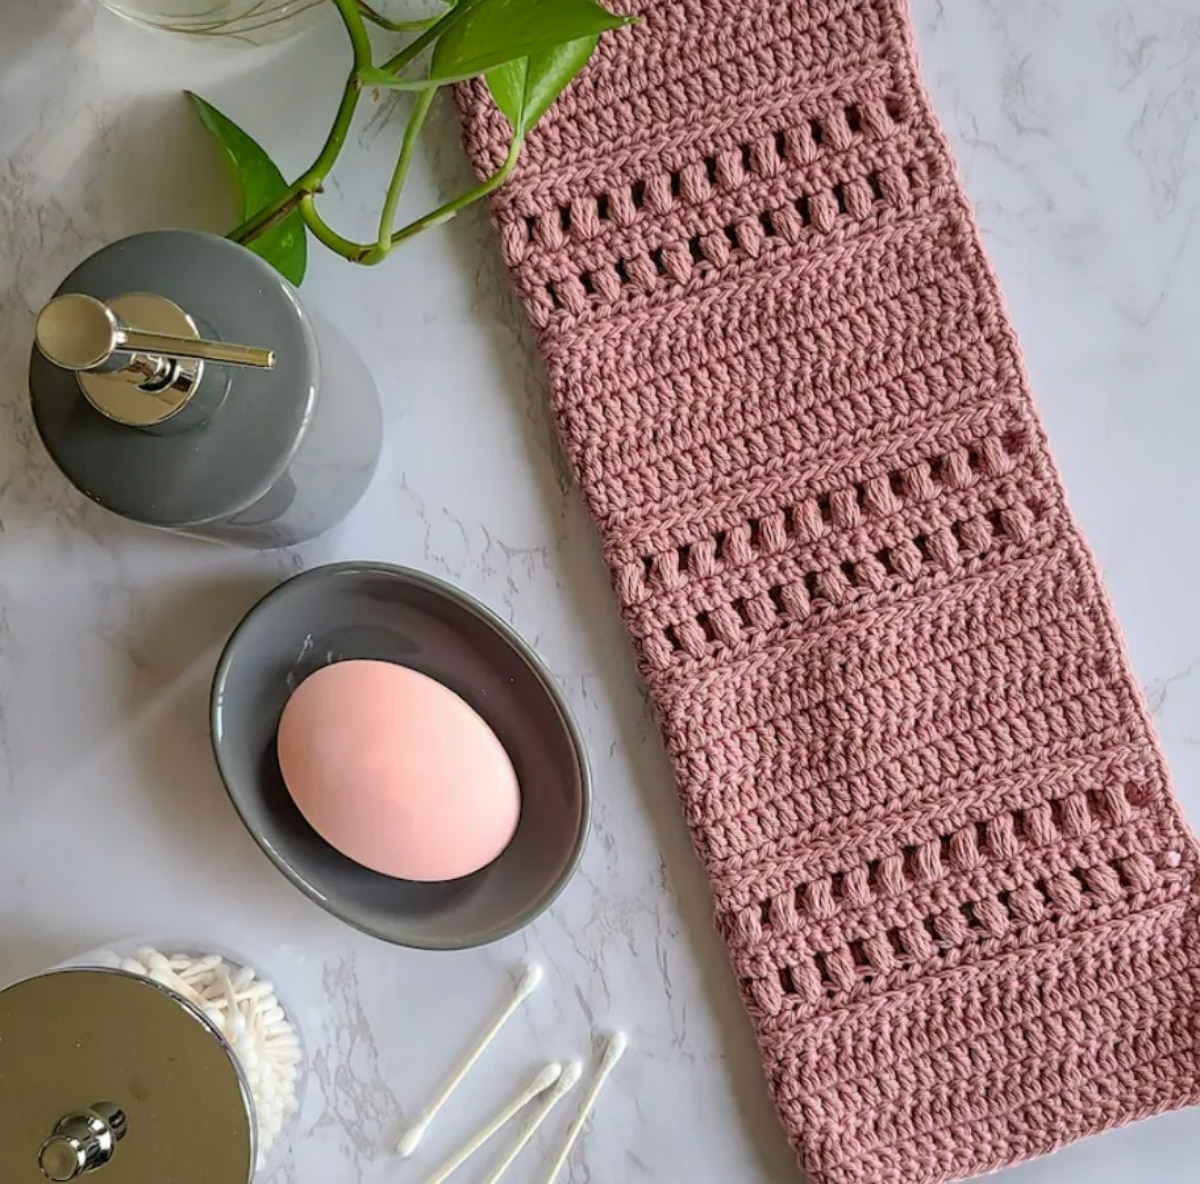 A pink crochet towel on a marble countertop next to a soap dish, some Q-tips, and a soap dispenser.